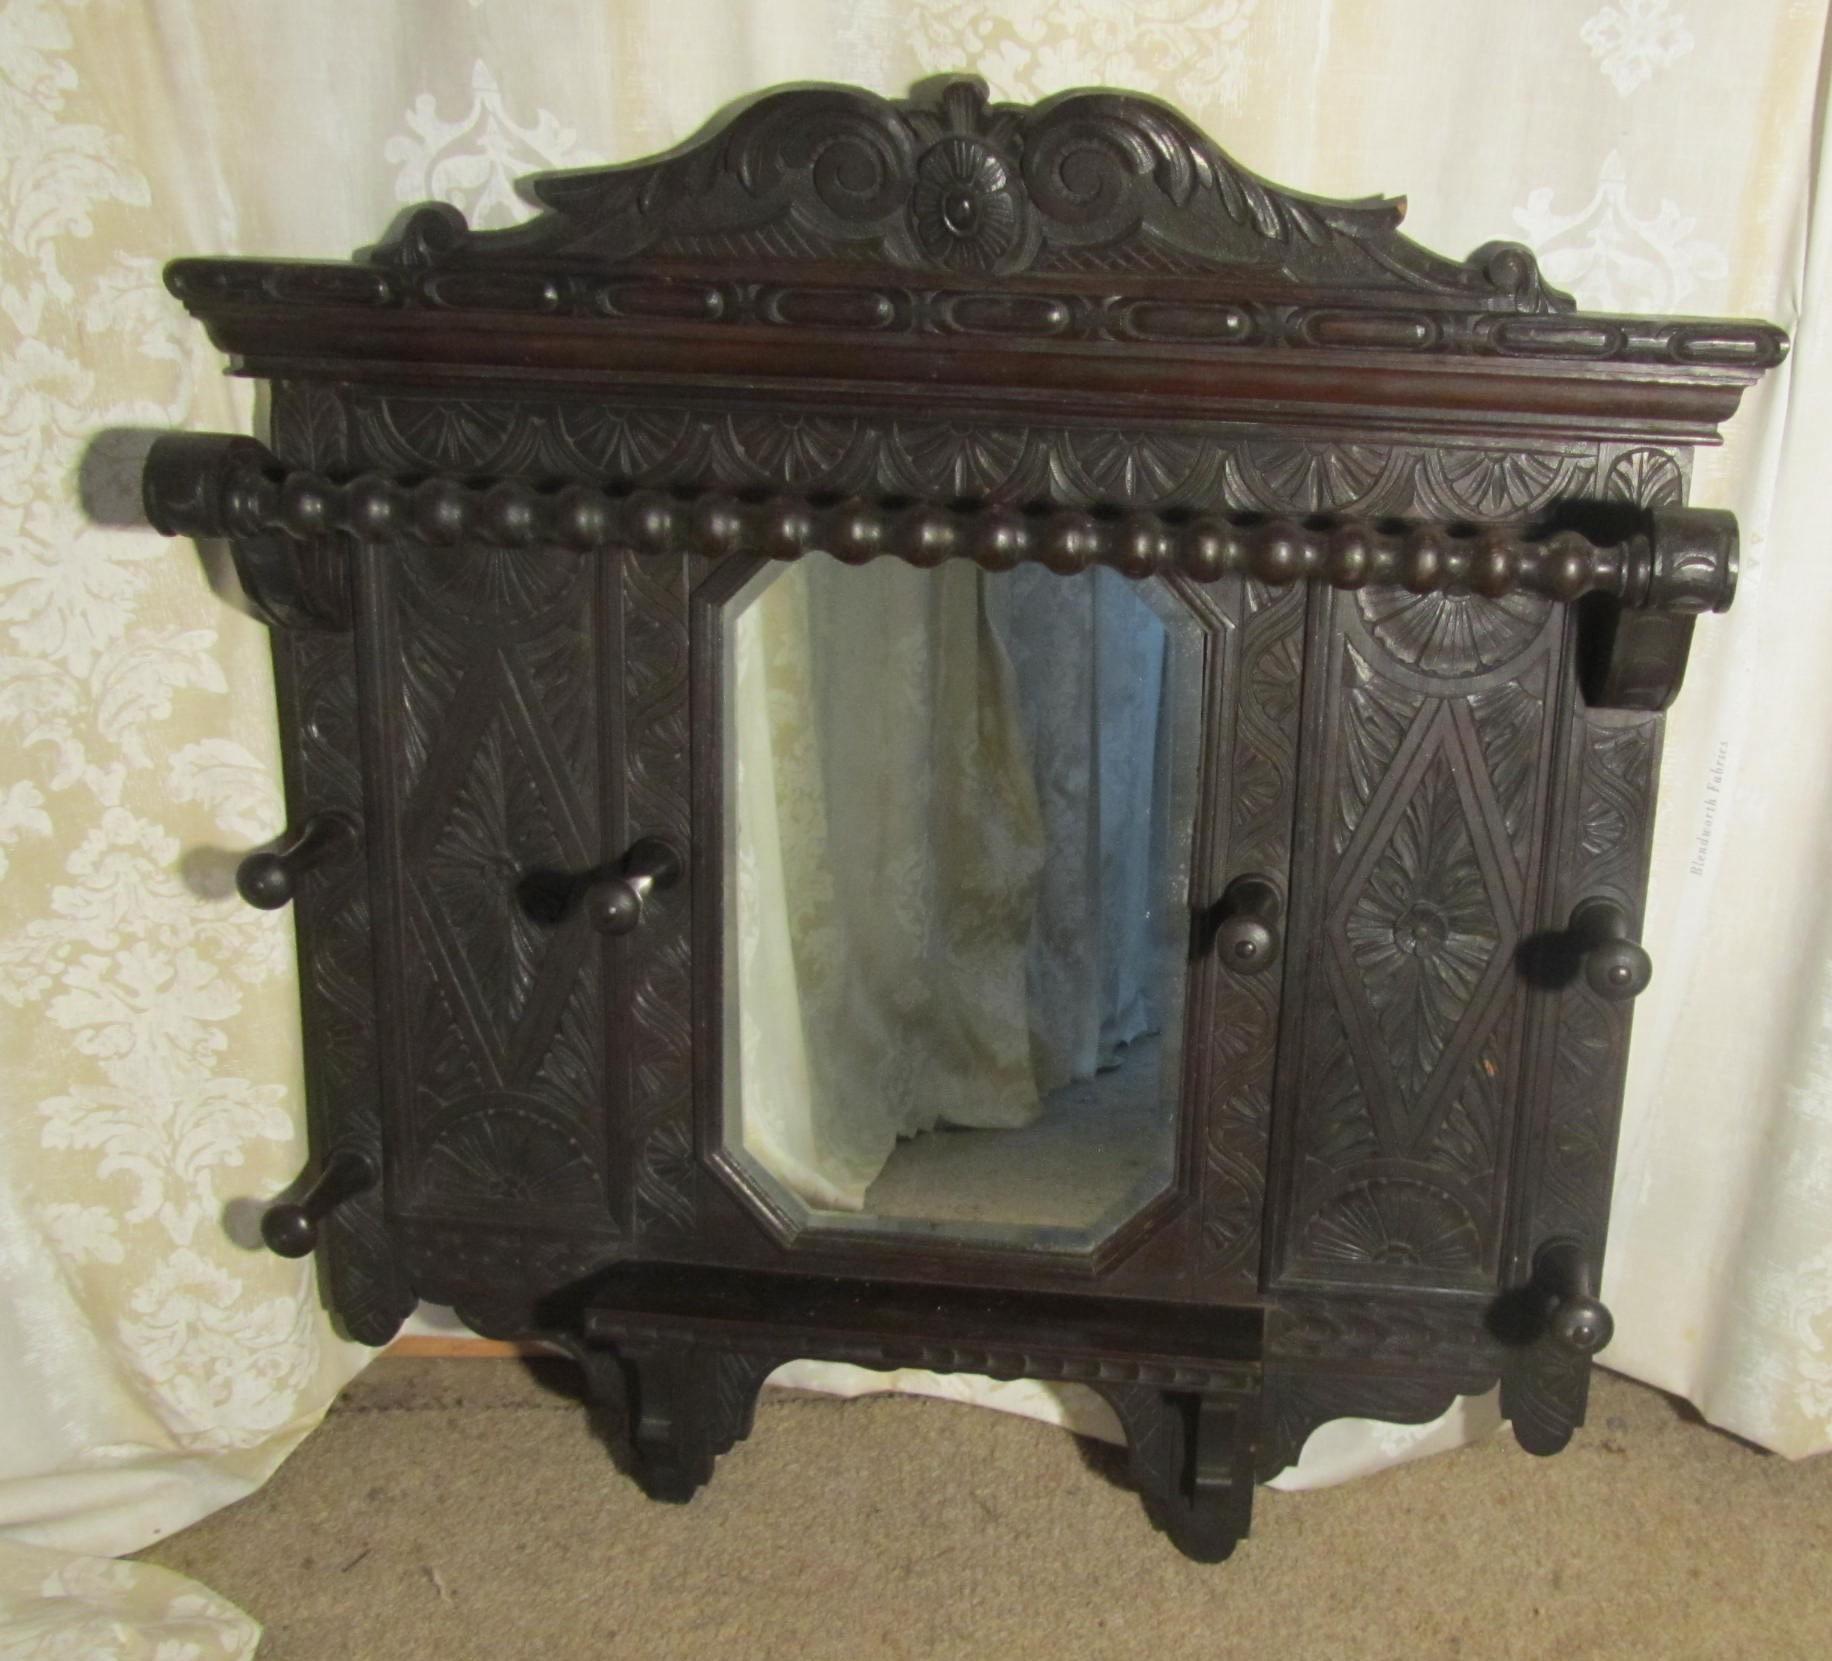 A Victorian Carved Oak Hall Mirror with Hat and Coat Hooks

This is an unusual piece in the Gothic style, it is a wall hanging piece, it has 6 chunky turned wooden hooks for coats or hats and a bobbin turned rail to hang walking sticks or umbrellas